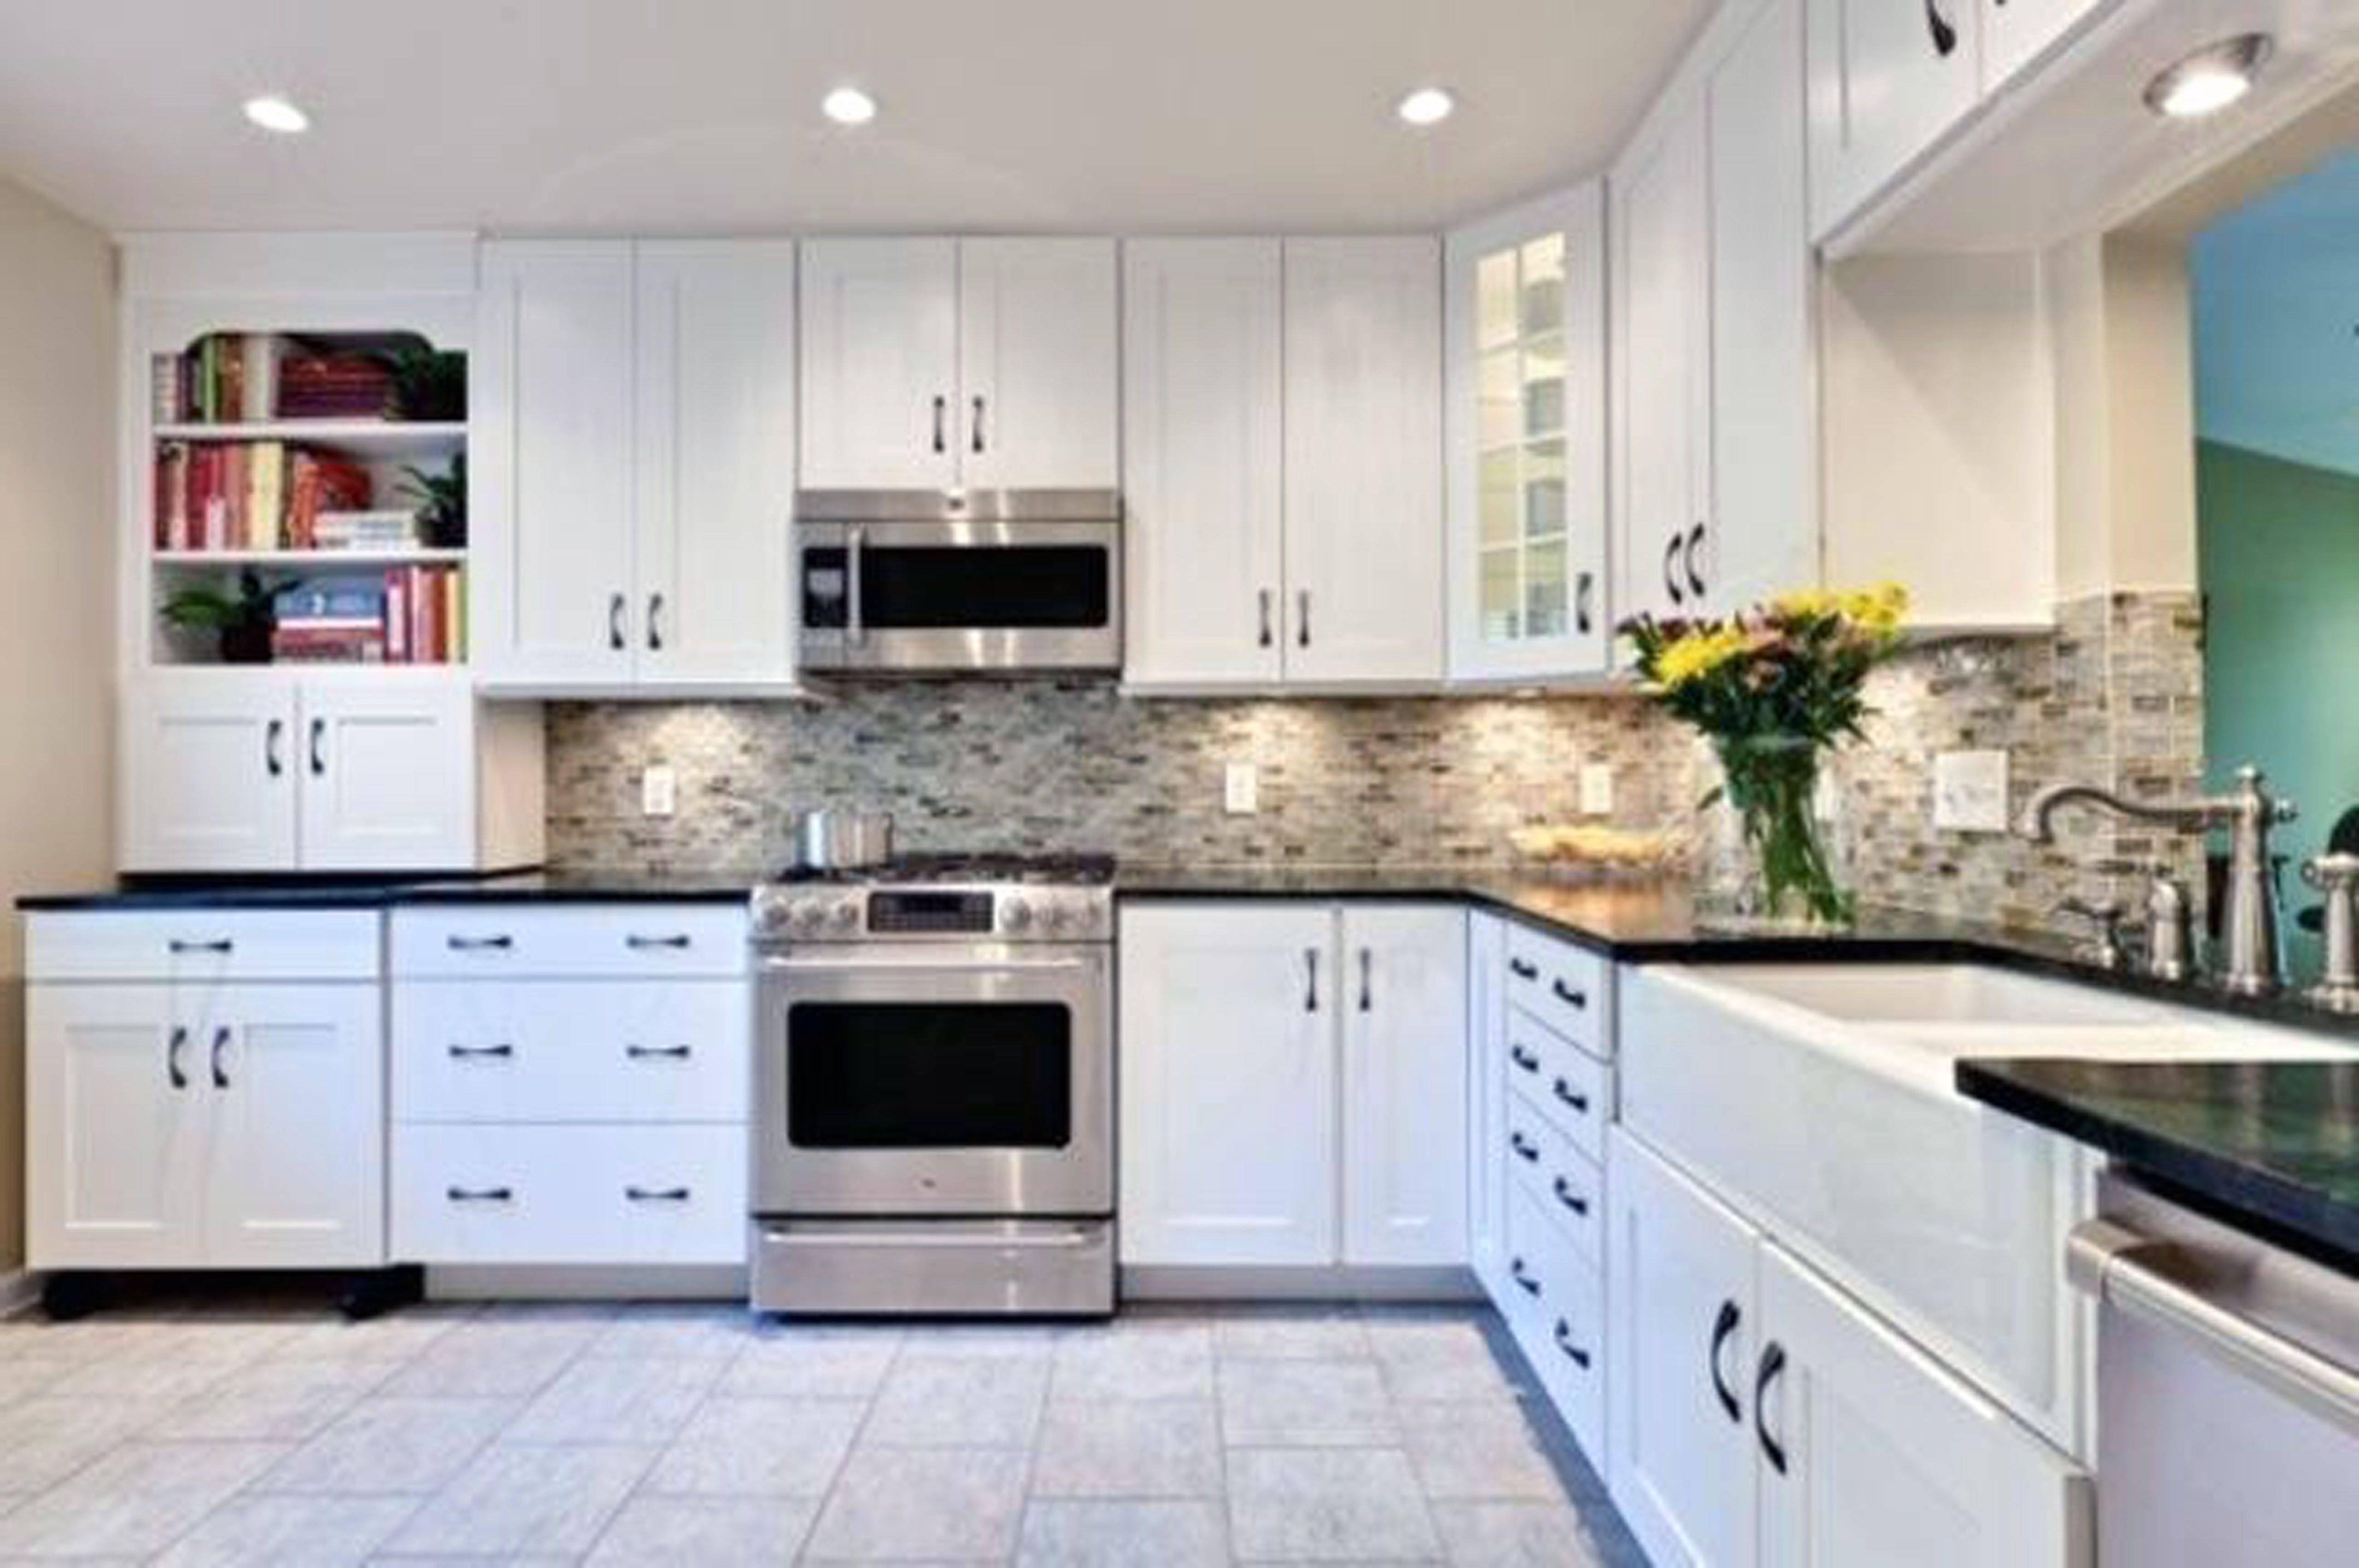 white kitchen cabinets with black countertops ... bookcase a perfect white kitchen cabinets with black IFABXNJ